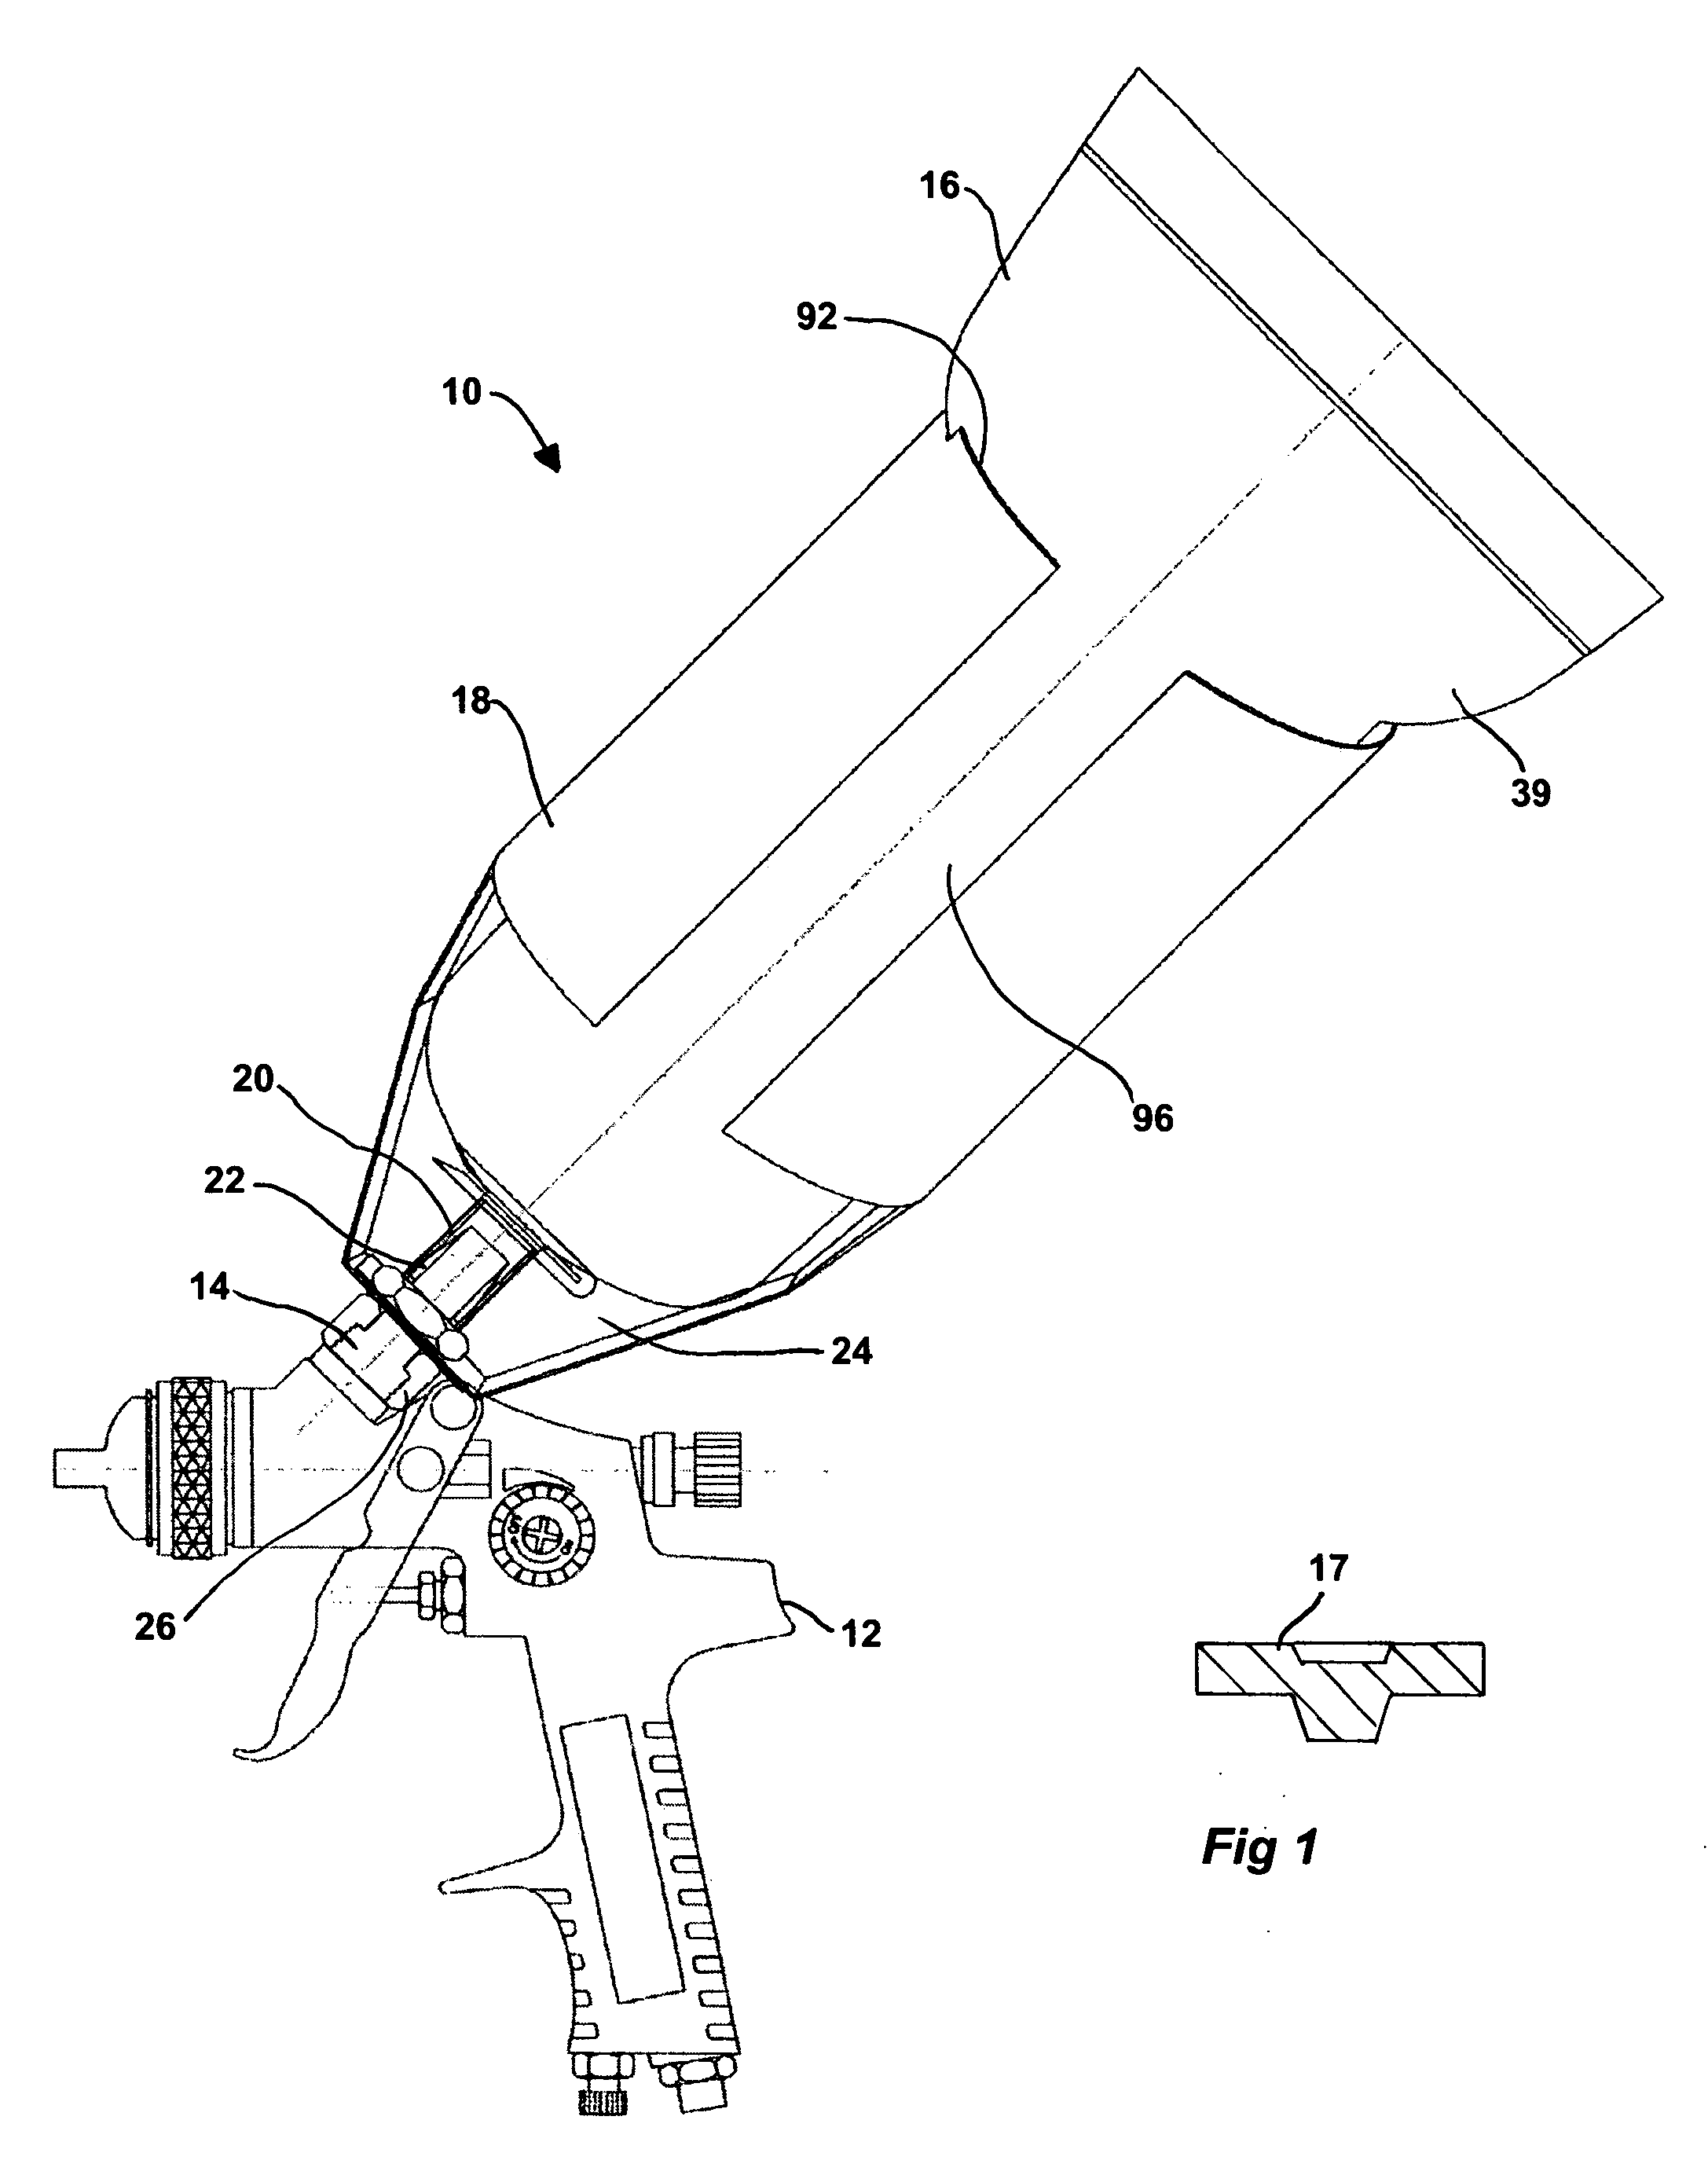 System and method for dispensing a fluid to a liquid spraying device